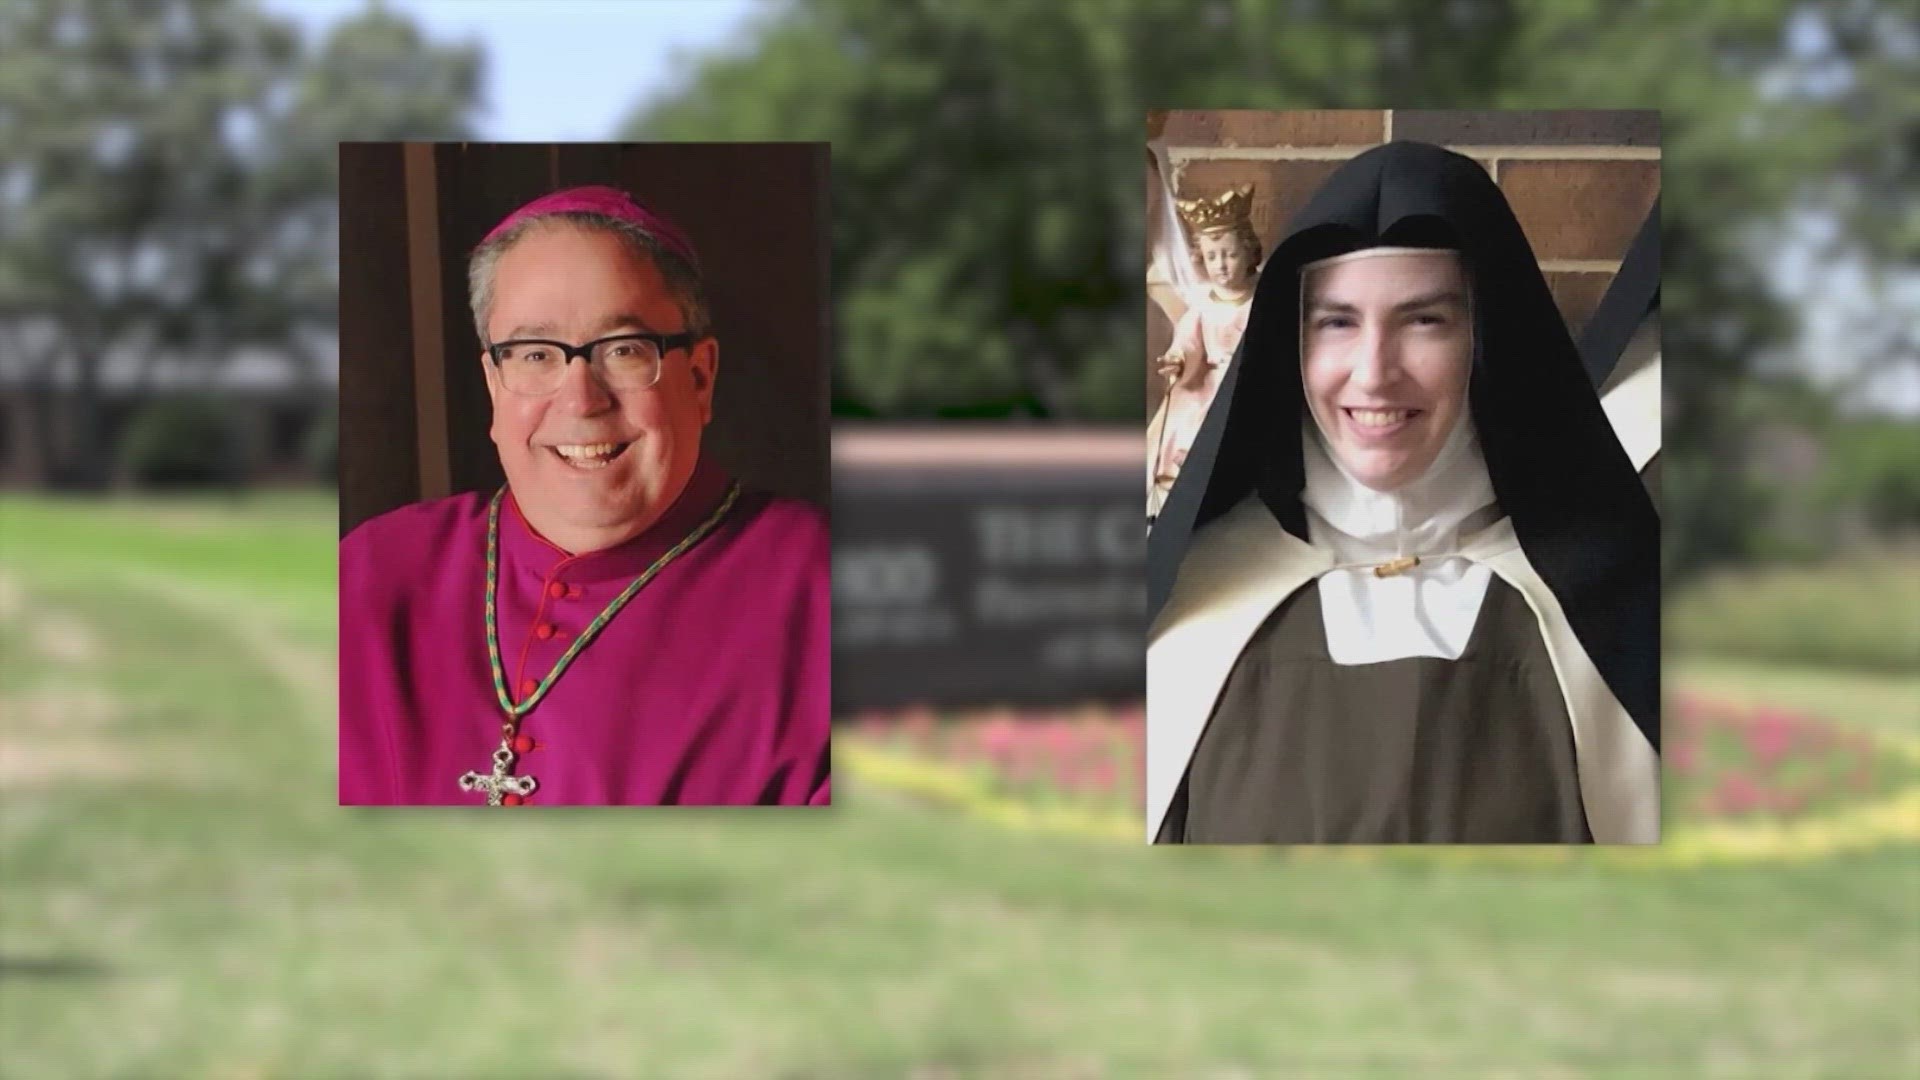 Texas Nun Allegedly Admits To Breaking Vow Of Chastity In Recording